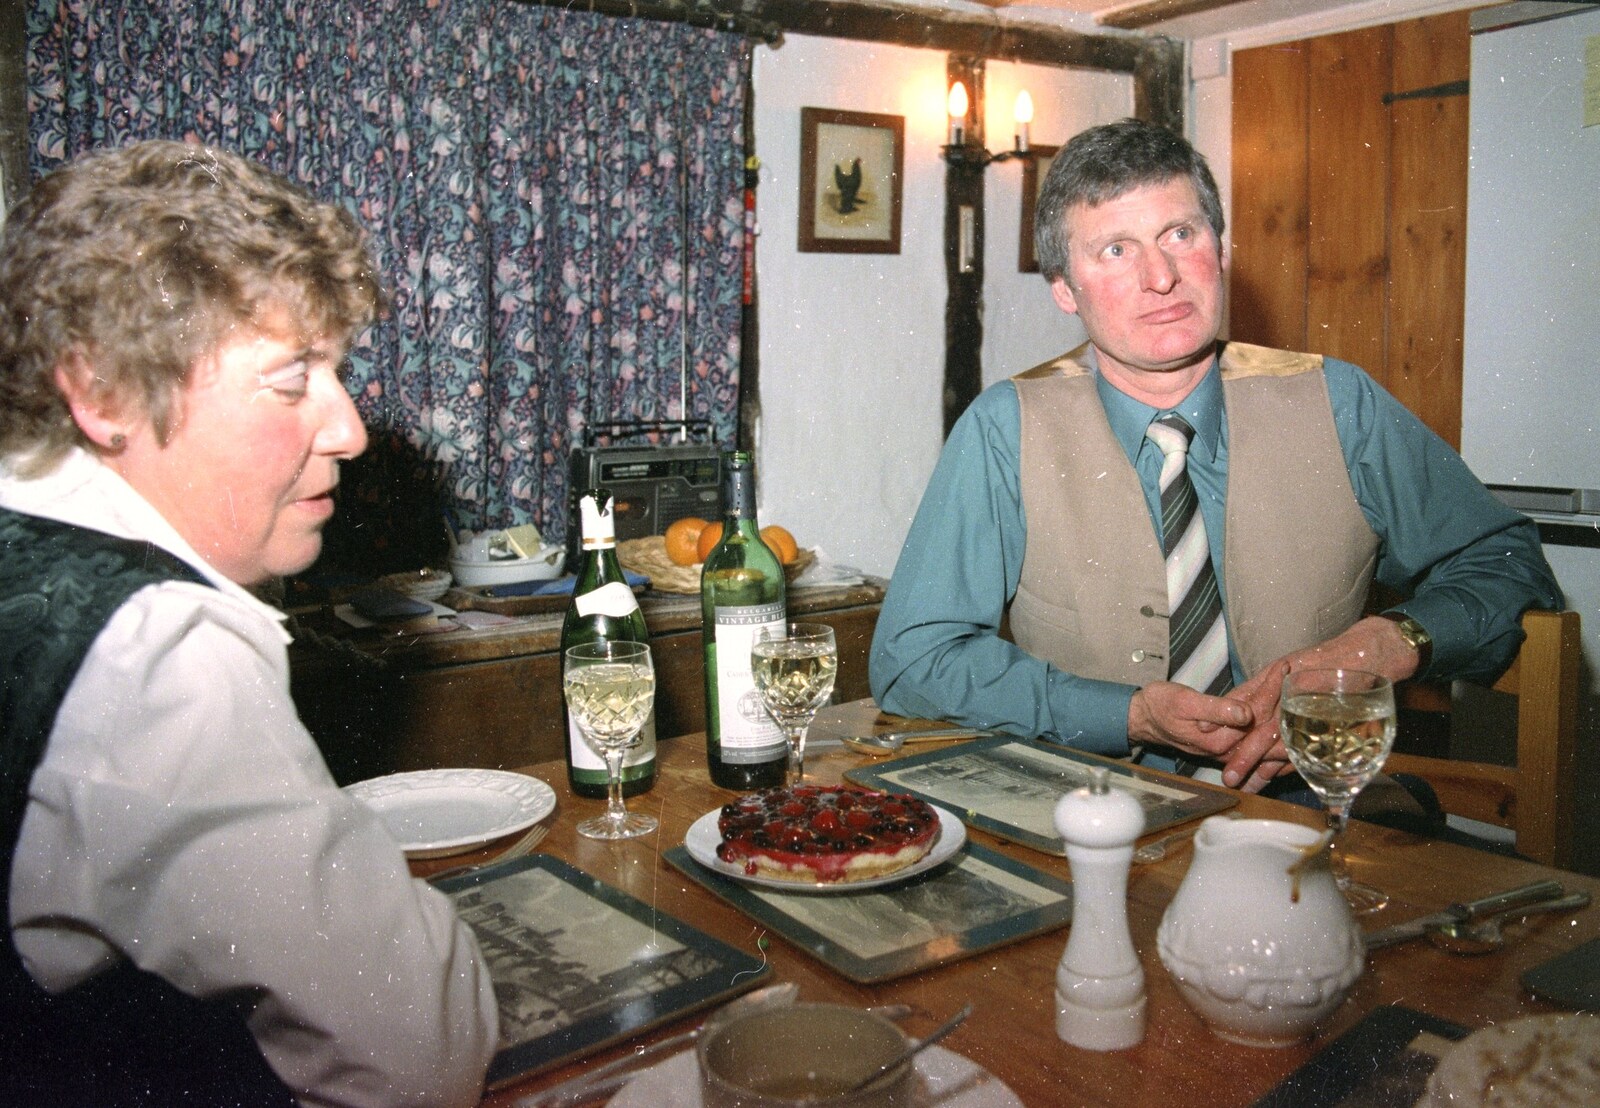 Brenda and Geoff, around Sue's again for dinner from Lunch and Dinner at Mad Sue's, Stuston, Suffolk - 30th March 1995